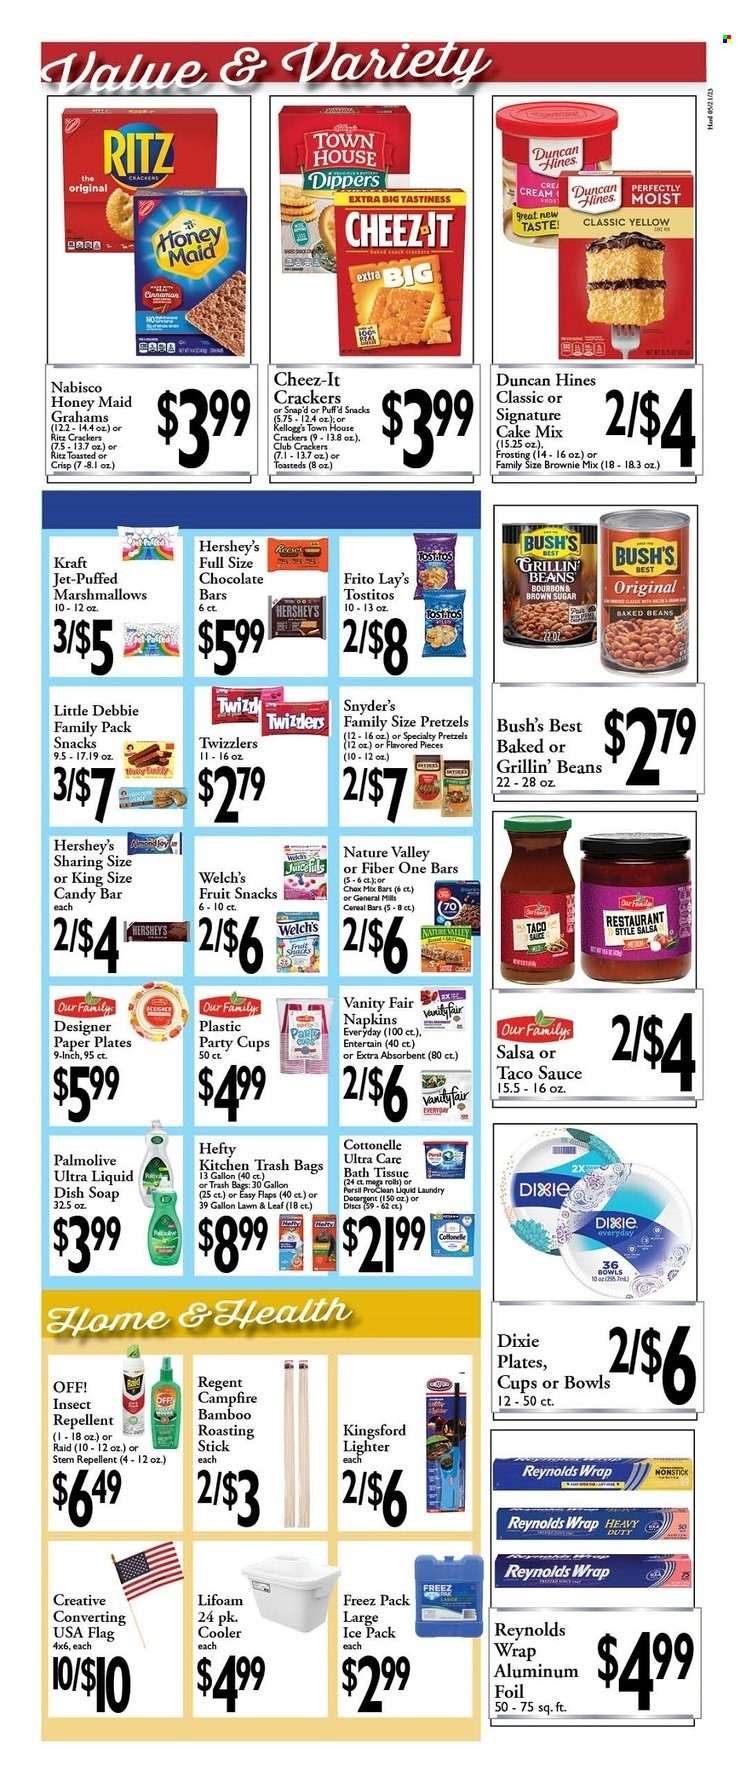 thumbnail - Harding's Markets Flyer - 05/21/2023 - 06/03/2023 - Sales products - pretzels, brownie mix, cake mix, beans, Welch's, sauce, Kraft®, Kingsford, Hershey's, marshmallows, cereal bar, crackers, Kellogg's, fruit snack, RITZ, chocolate bar, candy bar, Nabisco, Lay’s, Cheez-It, Tostitos, cane sugar, frosting, baked beans, cereals, Honey Maid, Nature Valley, Fiber One, cinnamon, taco sauce, salsa, bourbon, Palmolive, Jet. Page 5.